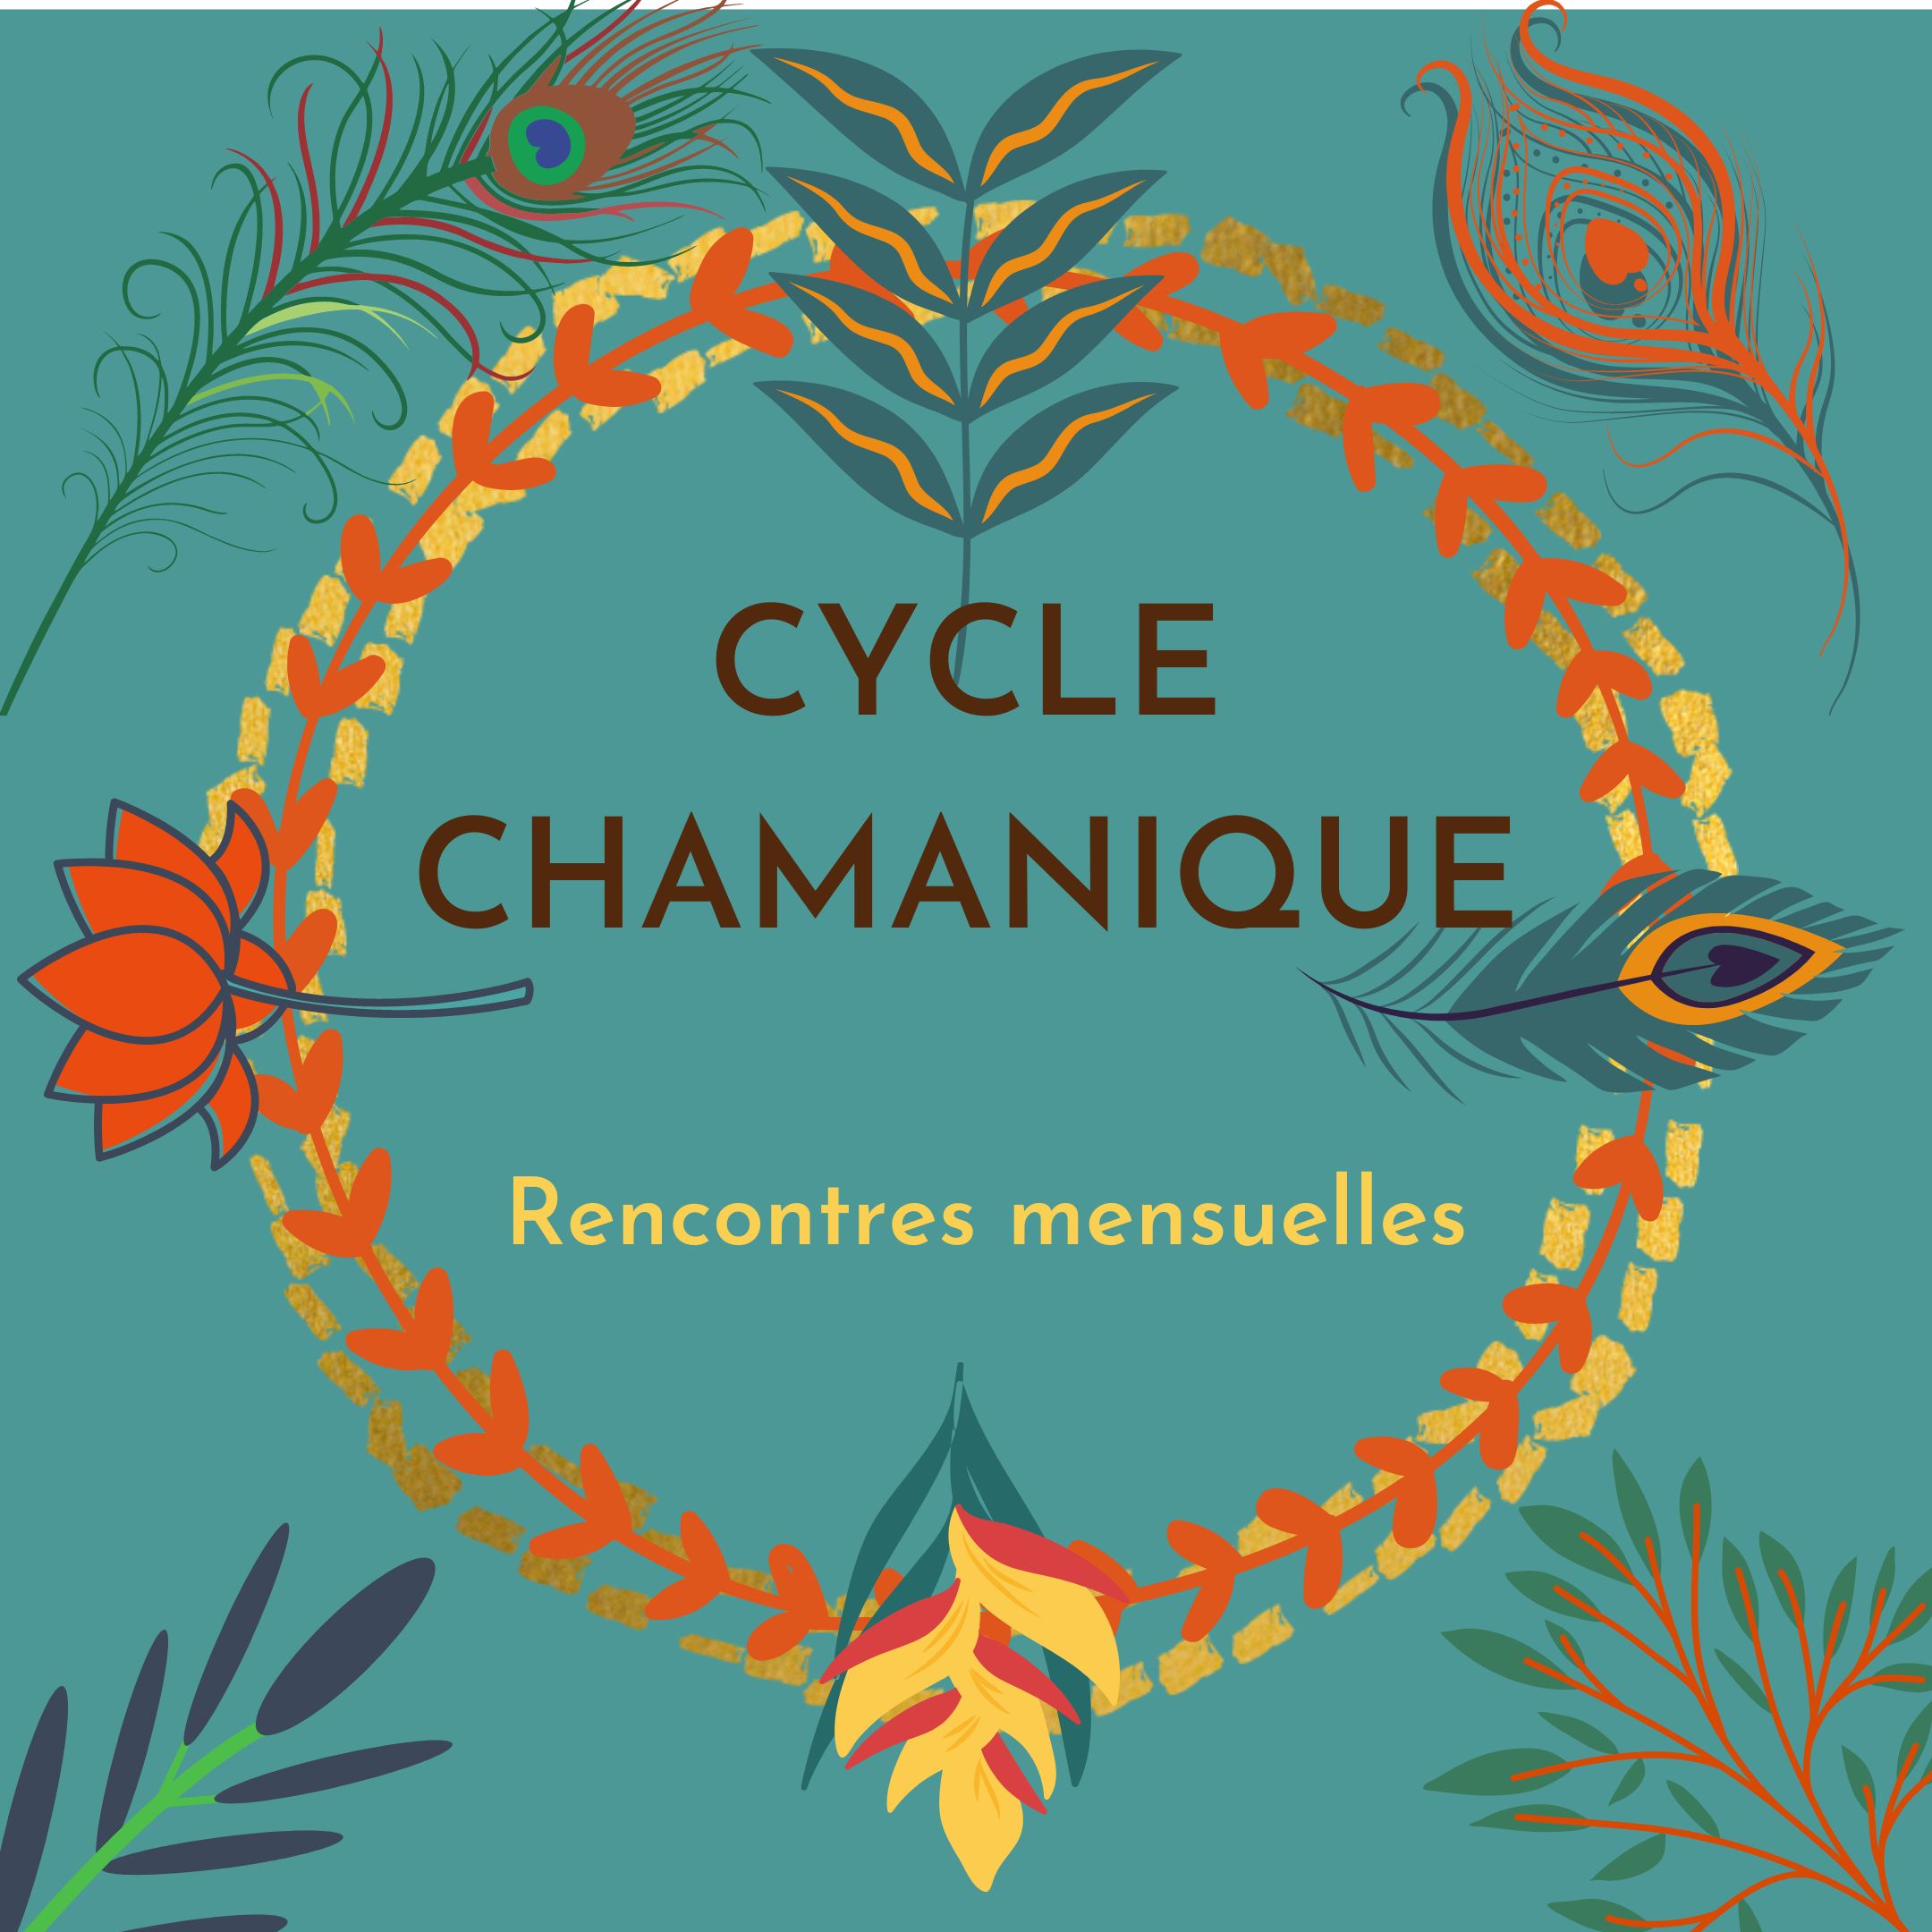 Cycle Chamanique